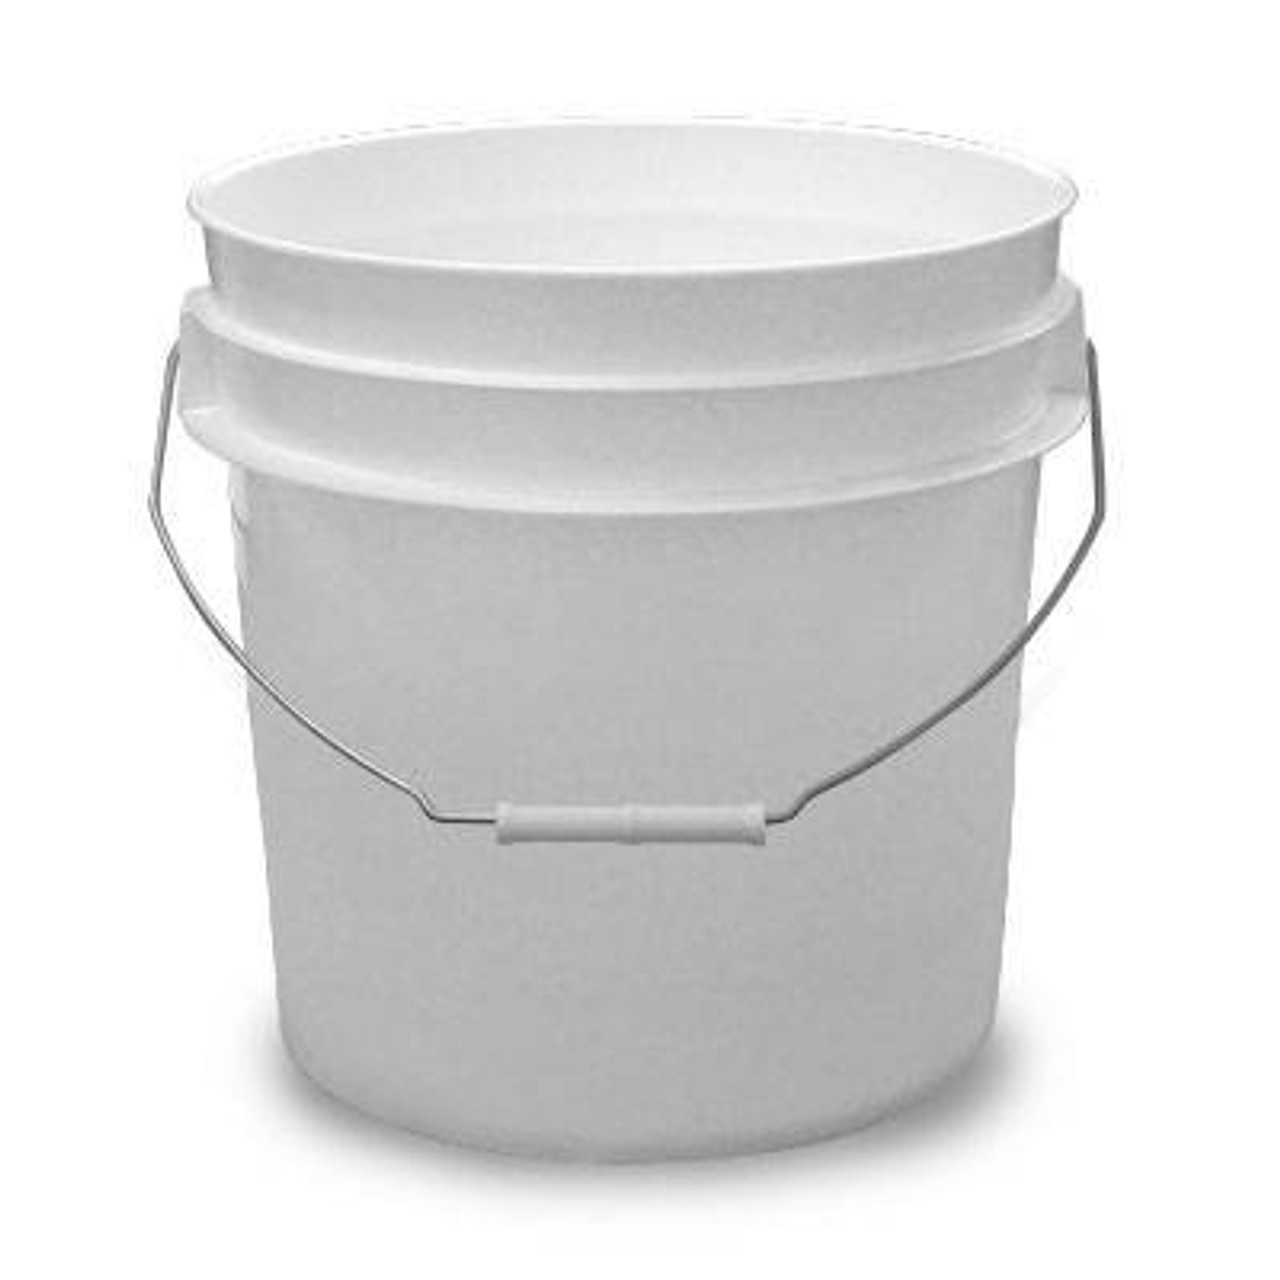 Getting To Know Buckets With Lids+ The Exceptional Price of Buying Buckets  With Lids - Arad Branding